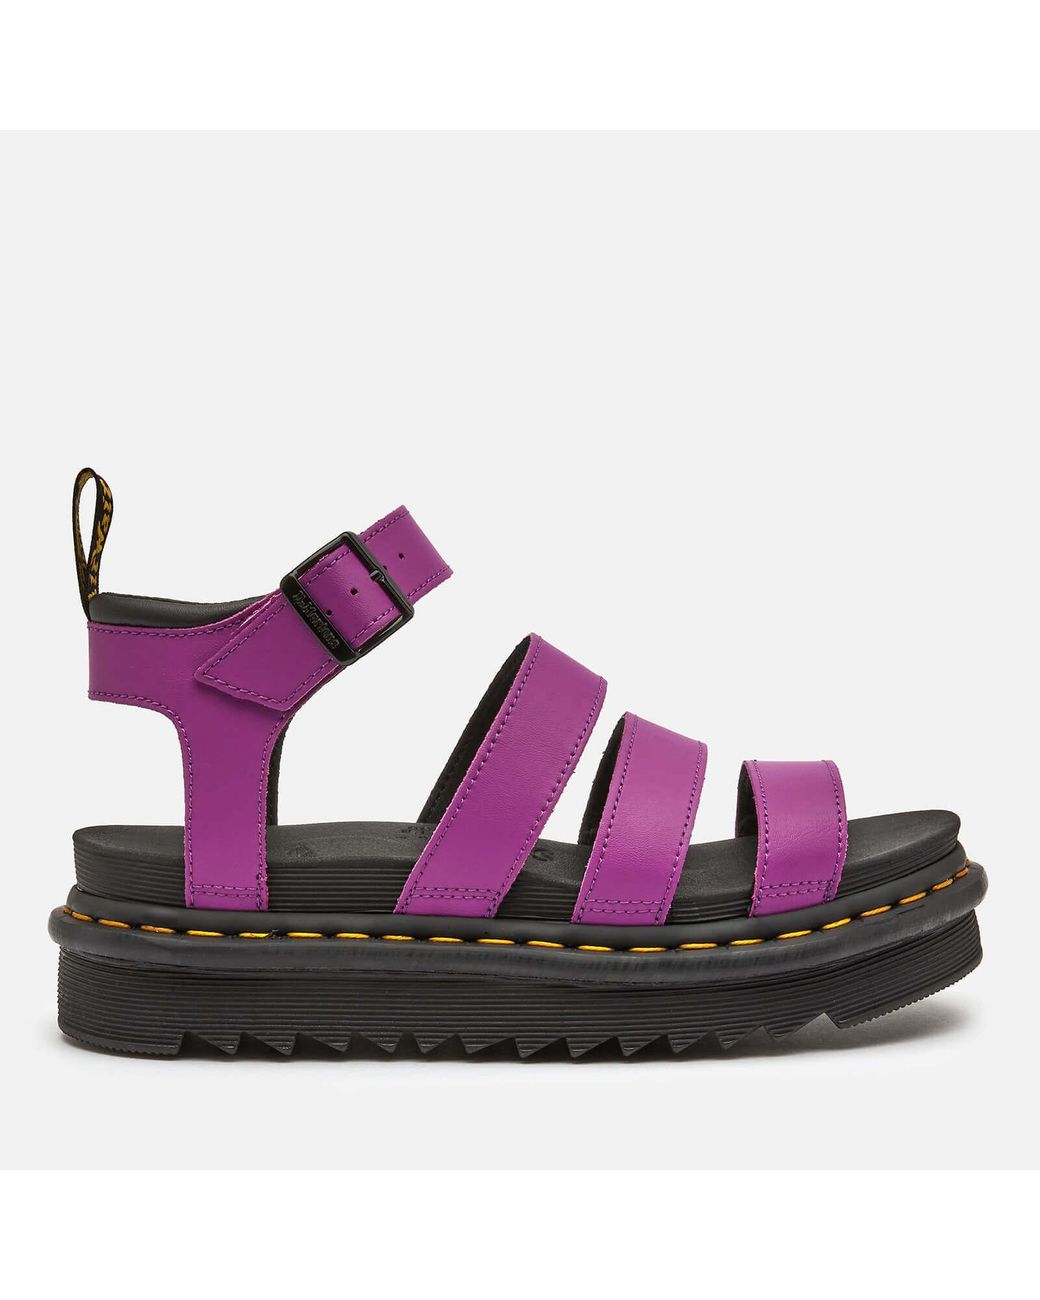 Dr. Martens Blaire Leather Strappy Sandals in Purple | Lyst